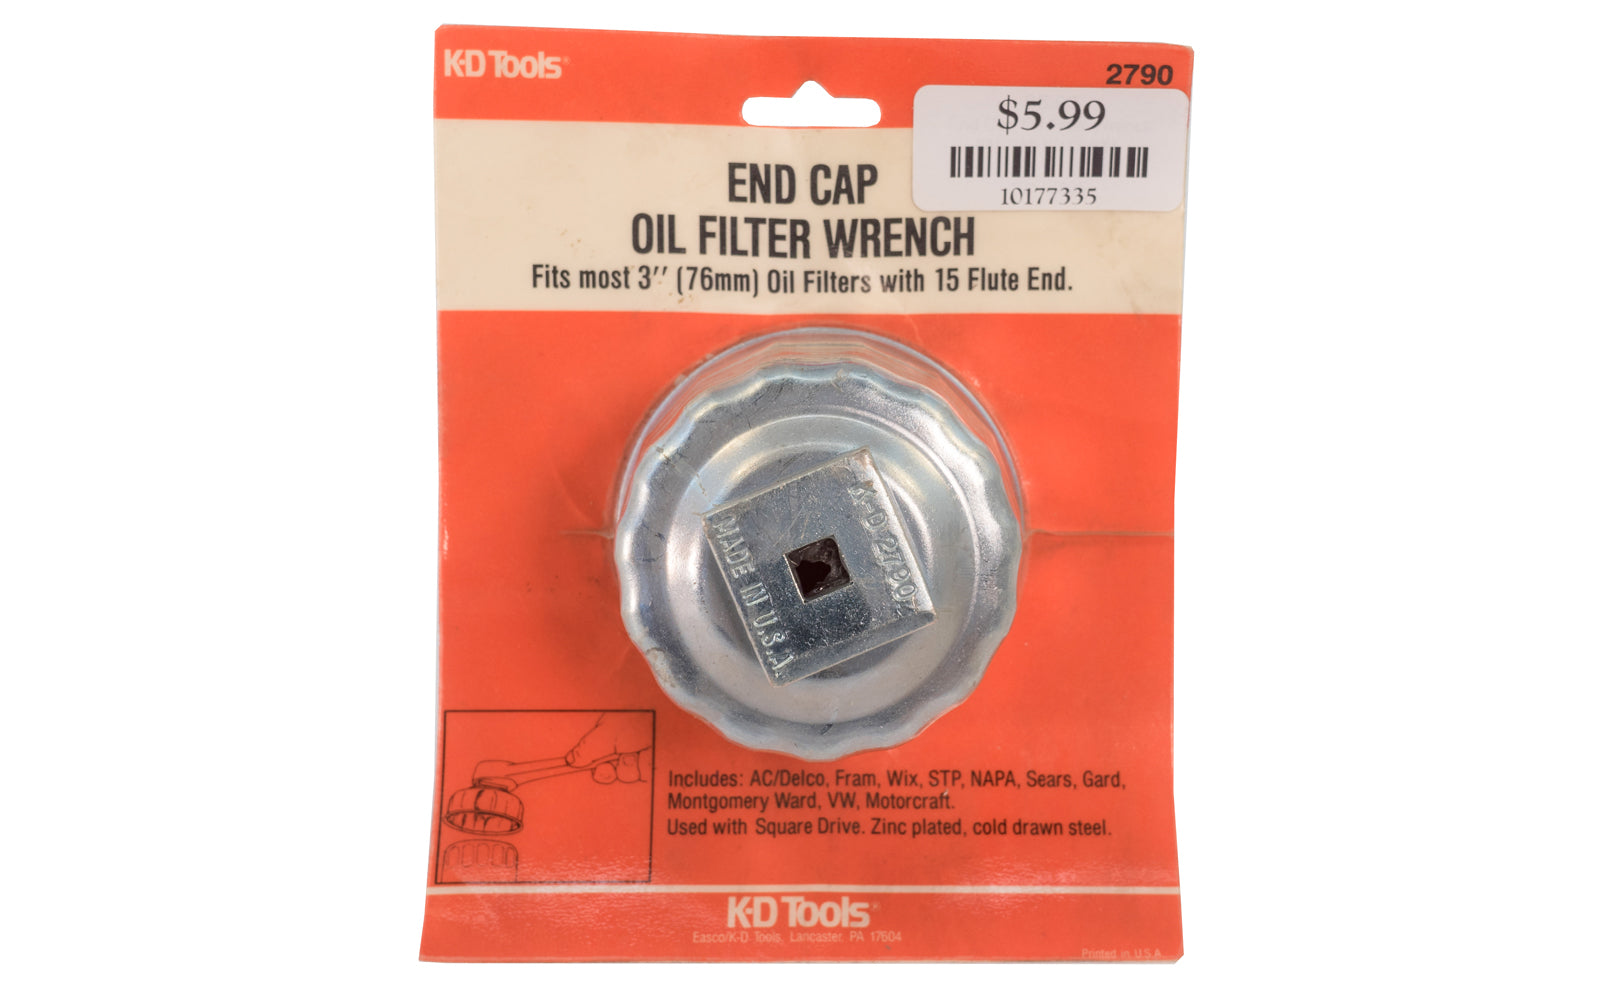 KD Tools End Cap Oil Filter Wrench. Made in USA.